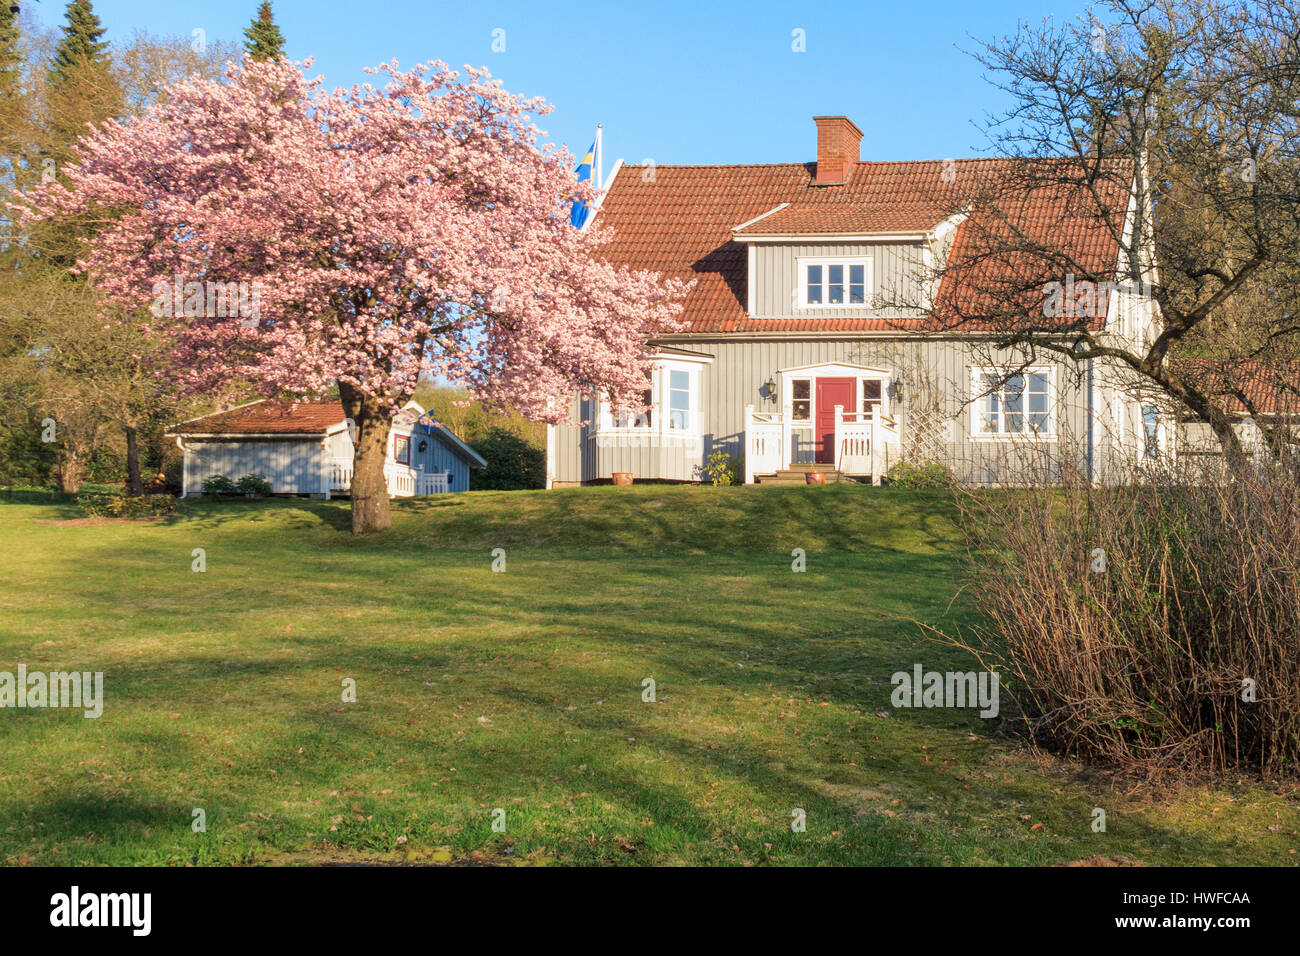 Typical swedish or scandinavian wooden house exterior with blossoming cherry blossom tree in front  Model Release: No.  Property Release: No.  Info: Photographer's understanding (but not guaranteed) is that property release is not needed for private properties for commercial use according to swedish law for images taken from public land/road. Image taken from public road. Stock Photo